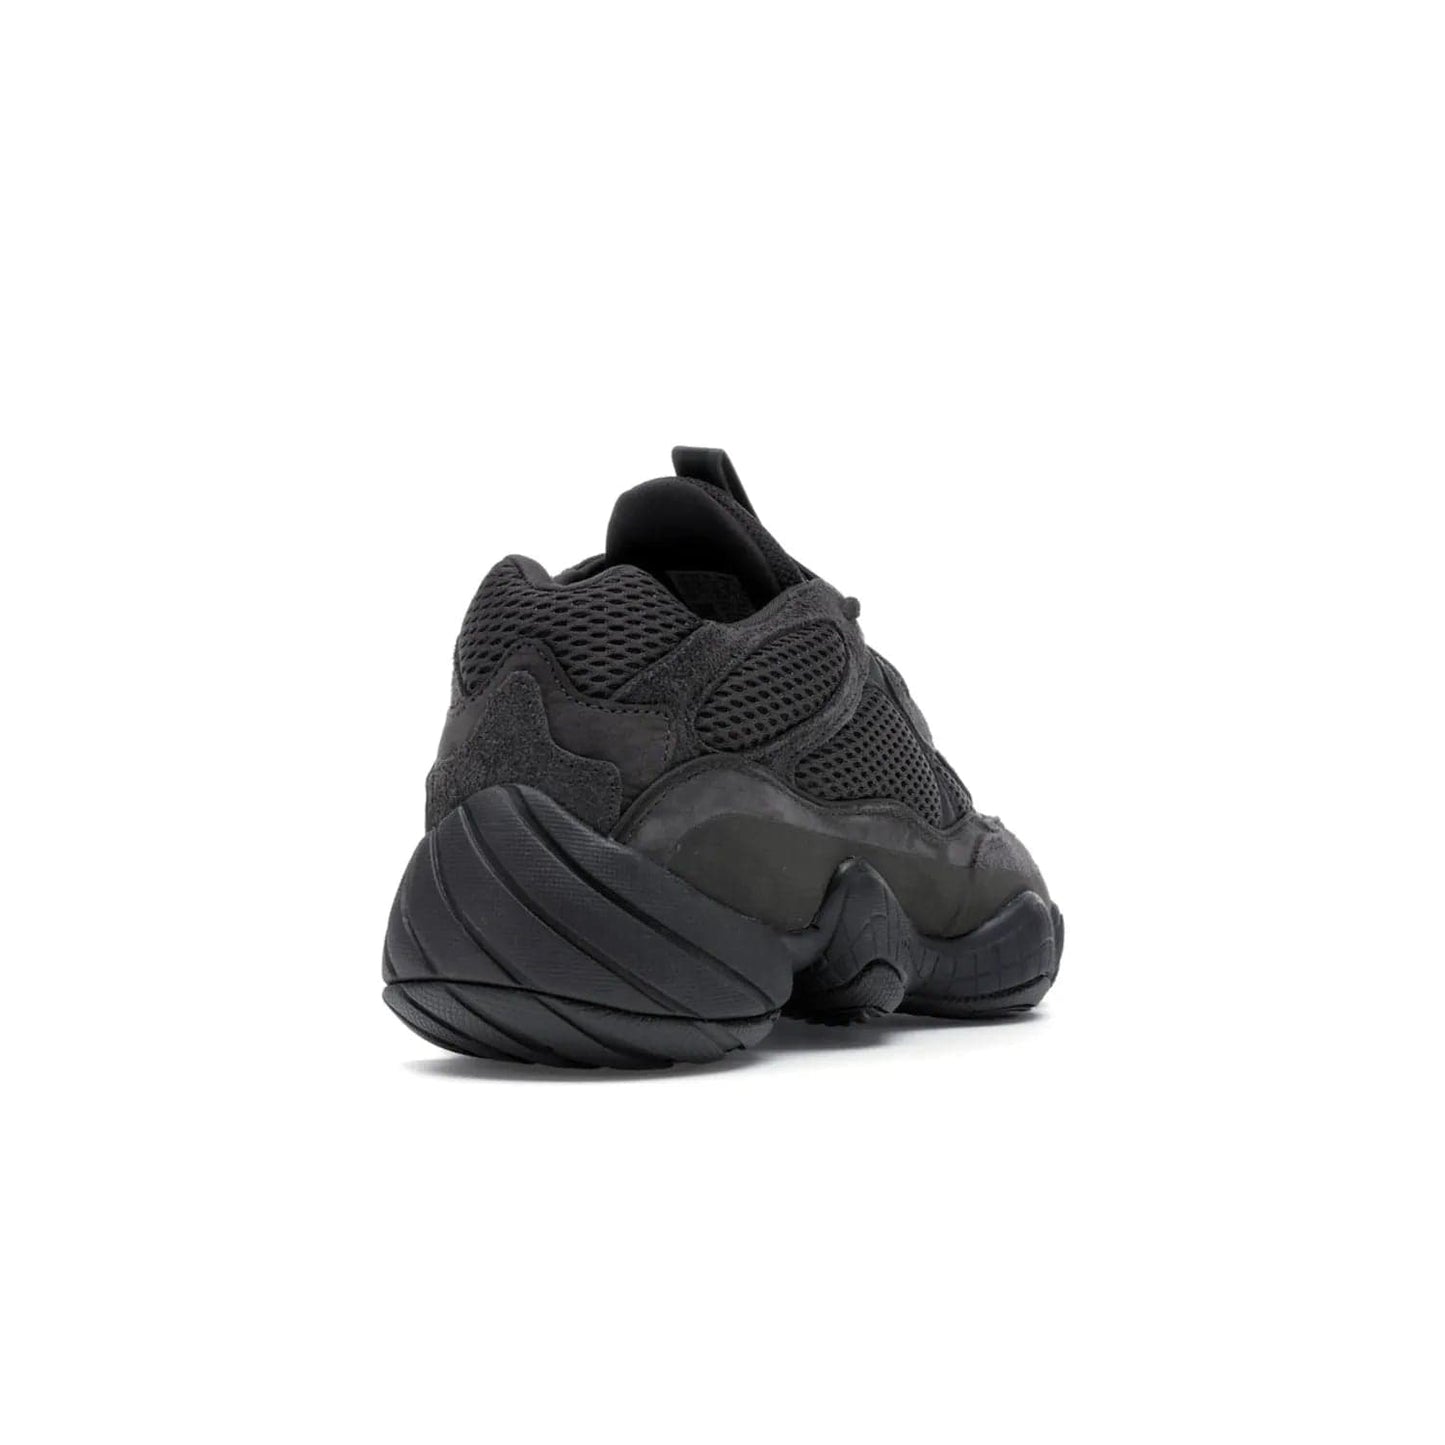 adidas Yeezy 500 Utility Black - Image 31 - Only at www.BallersClubKickz.com - Iconic adidas Yeezy 500 Utility Black in All-Black colorway. Durable black mesh and suede upper with adiPRENE® sole delivers comfort and support. Be unstoppable with the Yeezy 500 Utility Black. Released July 2018.